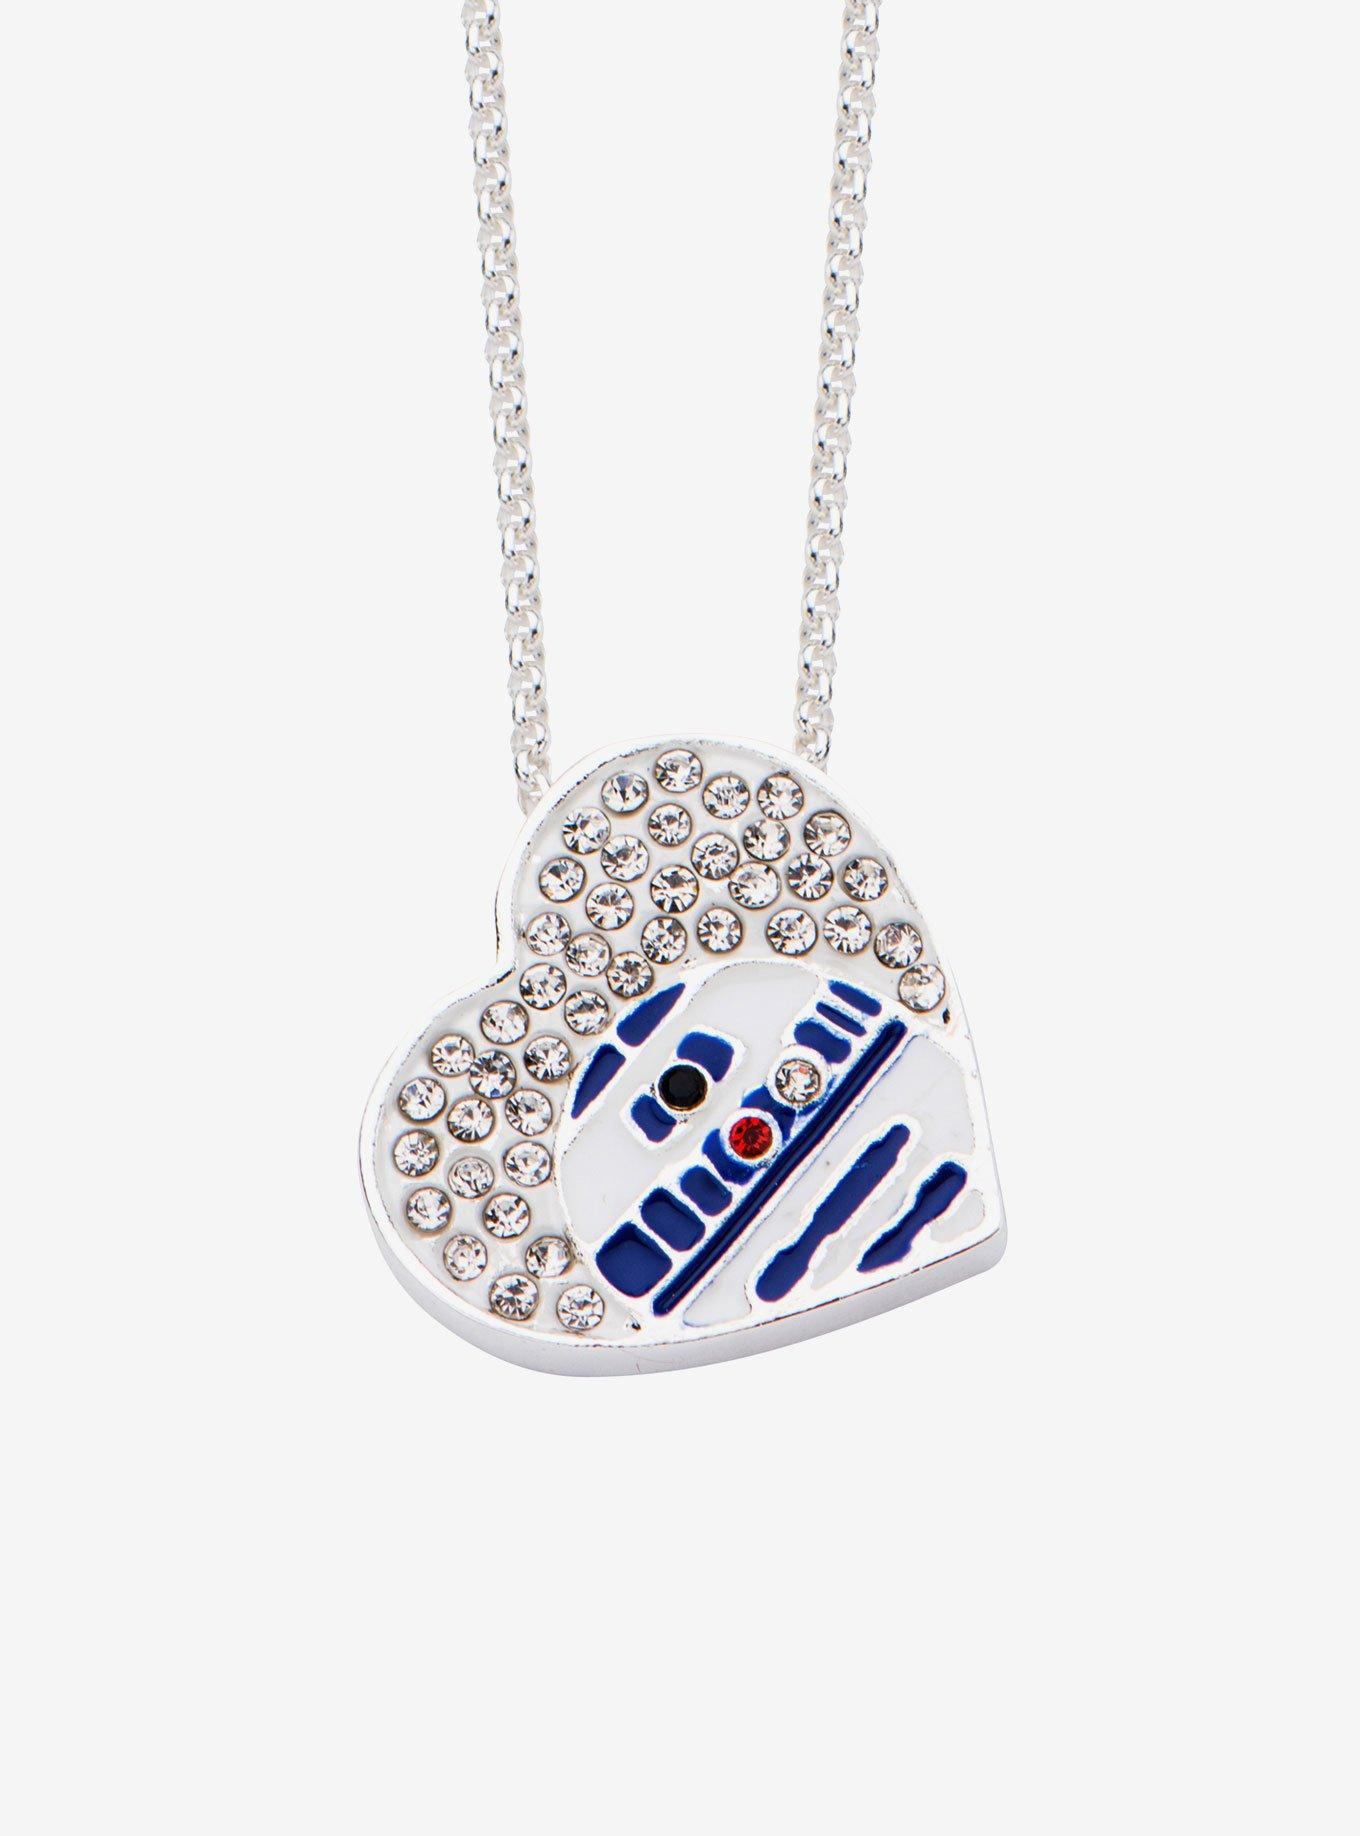 Star Wars Silver Plated R2-D2 Heart Necklace, , hi-res